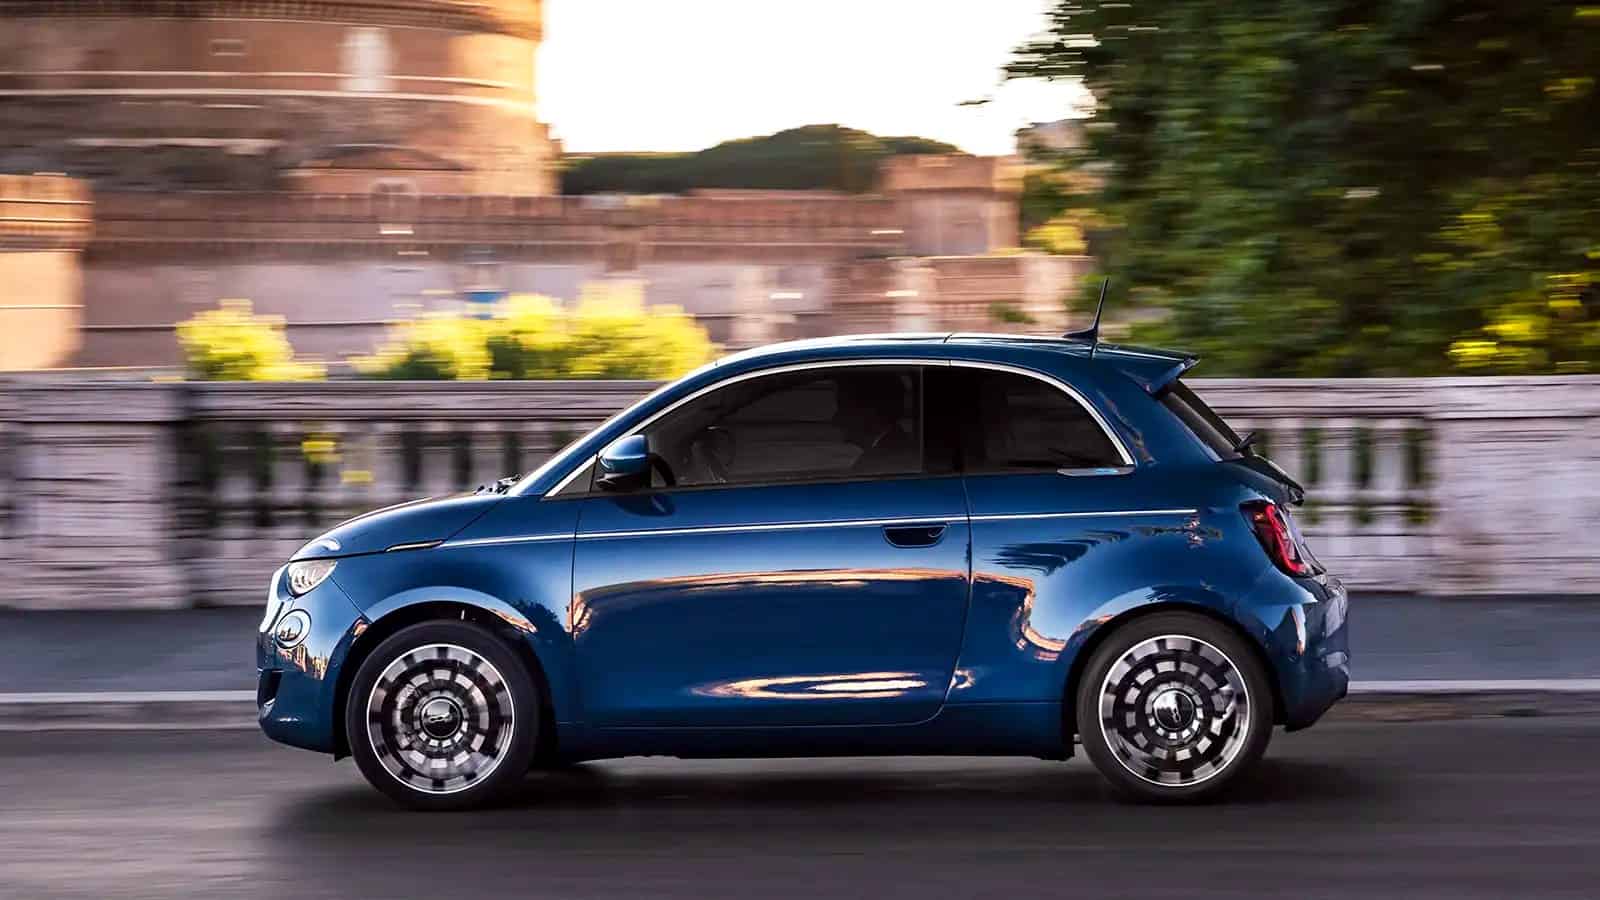 Fiat's Giving the All-Electric 500e One More Try in the U.S. in 2024 The new electric Fiat 500e will arrive in North America in early 2024, after launching in Europe in 2020.